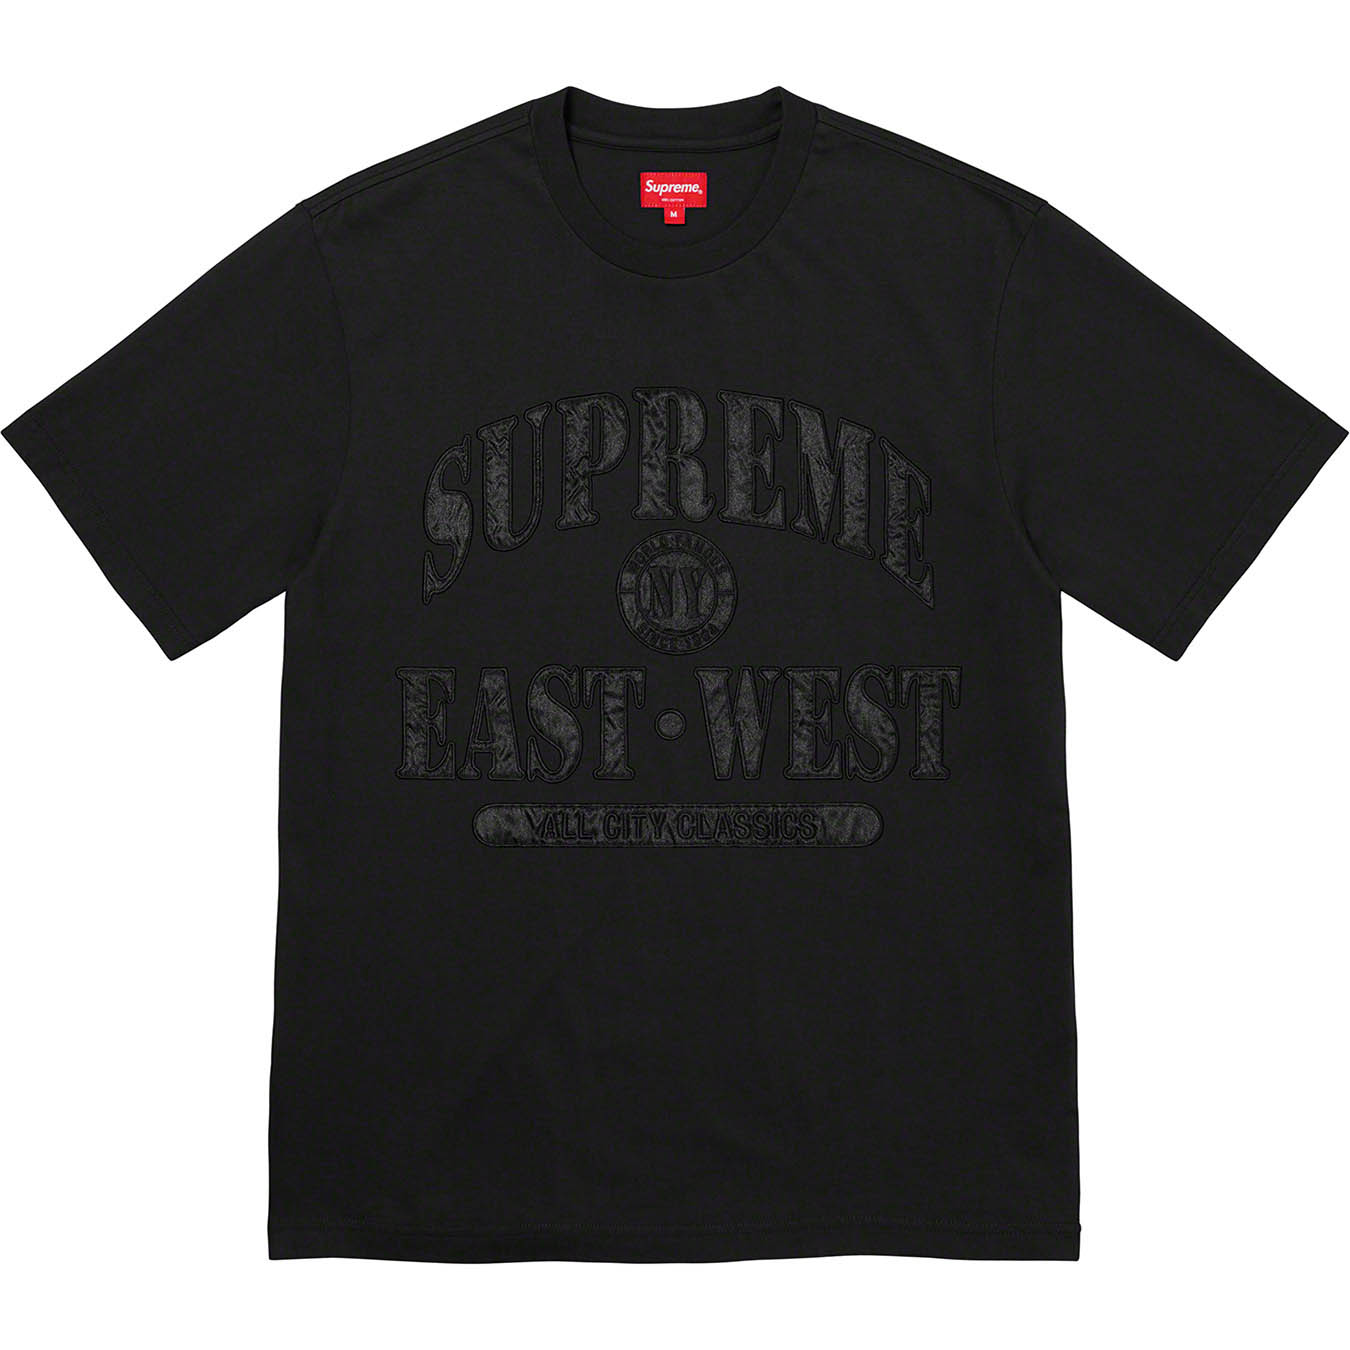 Supreme East West S/S Top